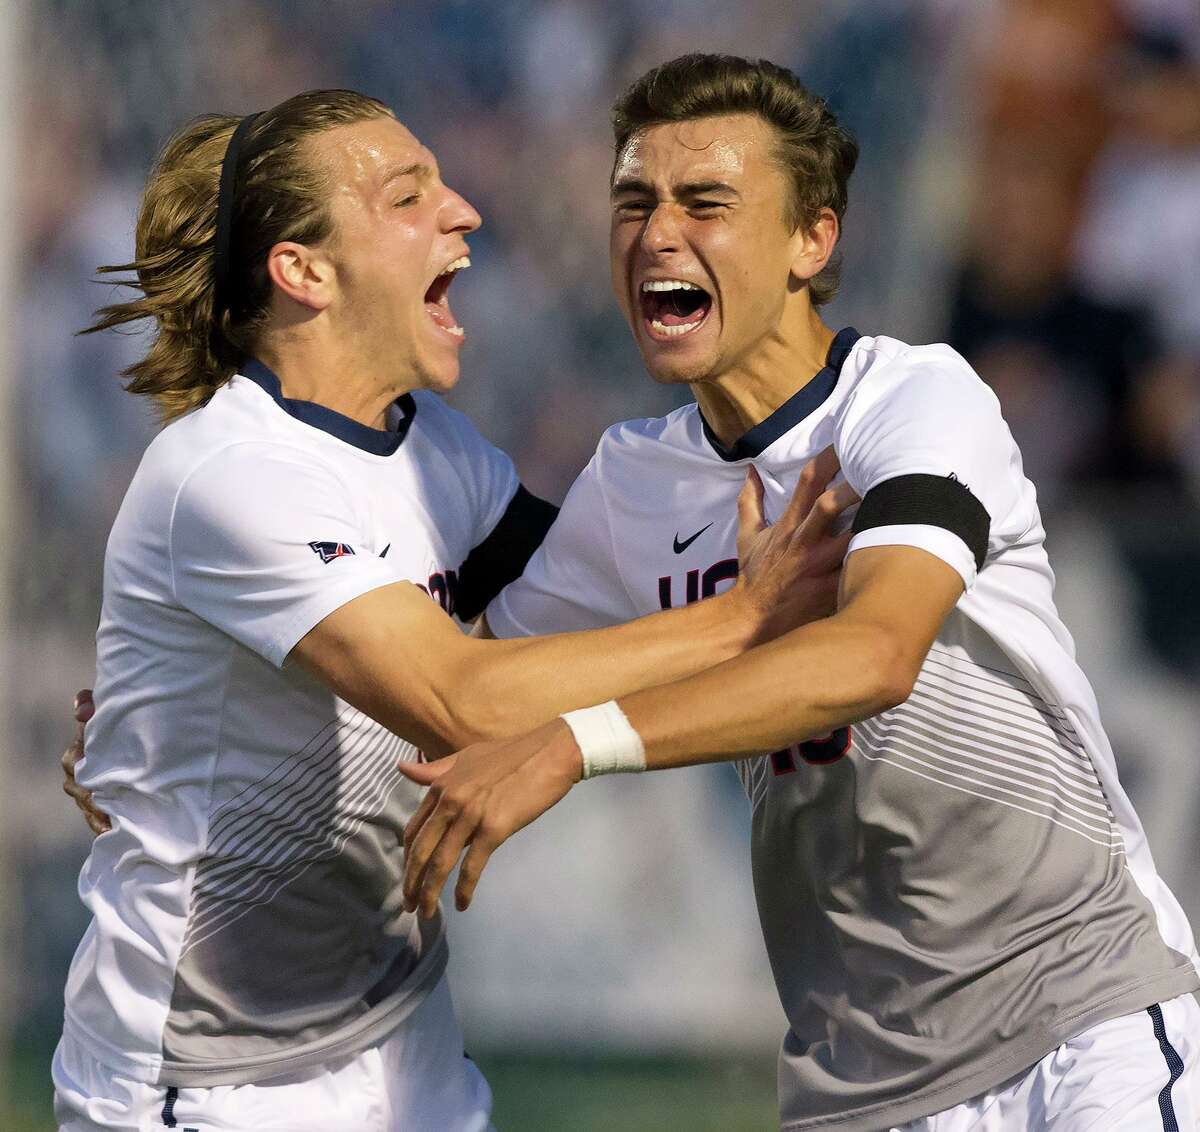 Austin DaSilva of Brookfield, right, celebrates his first collegiate goal for the UConn men's soccer team with teammate Niko Petridis of Norwalk. UConn played to a 1-1 tie with Georgetown Sept. 9, 2017 in Storrs.